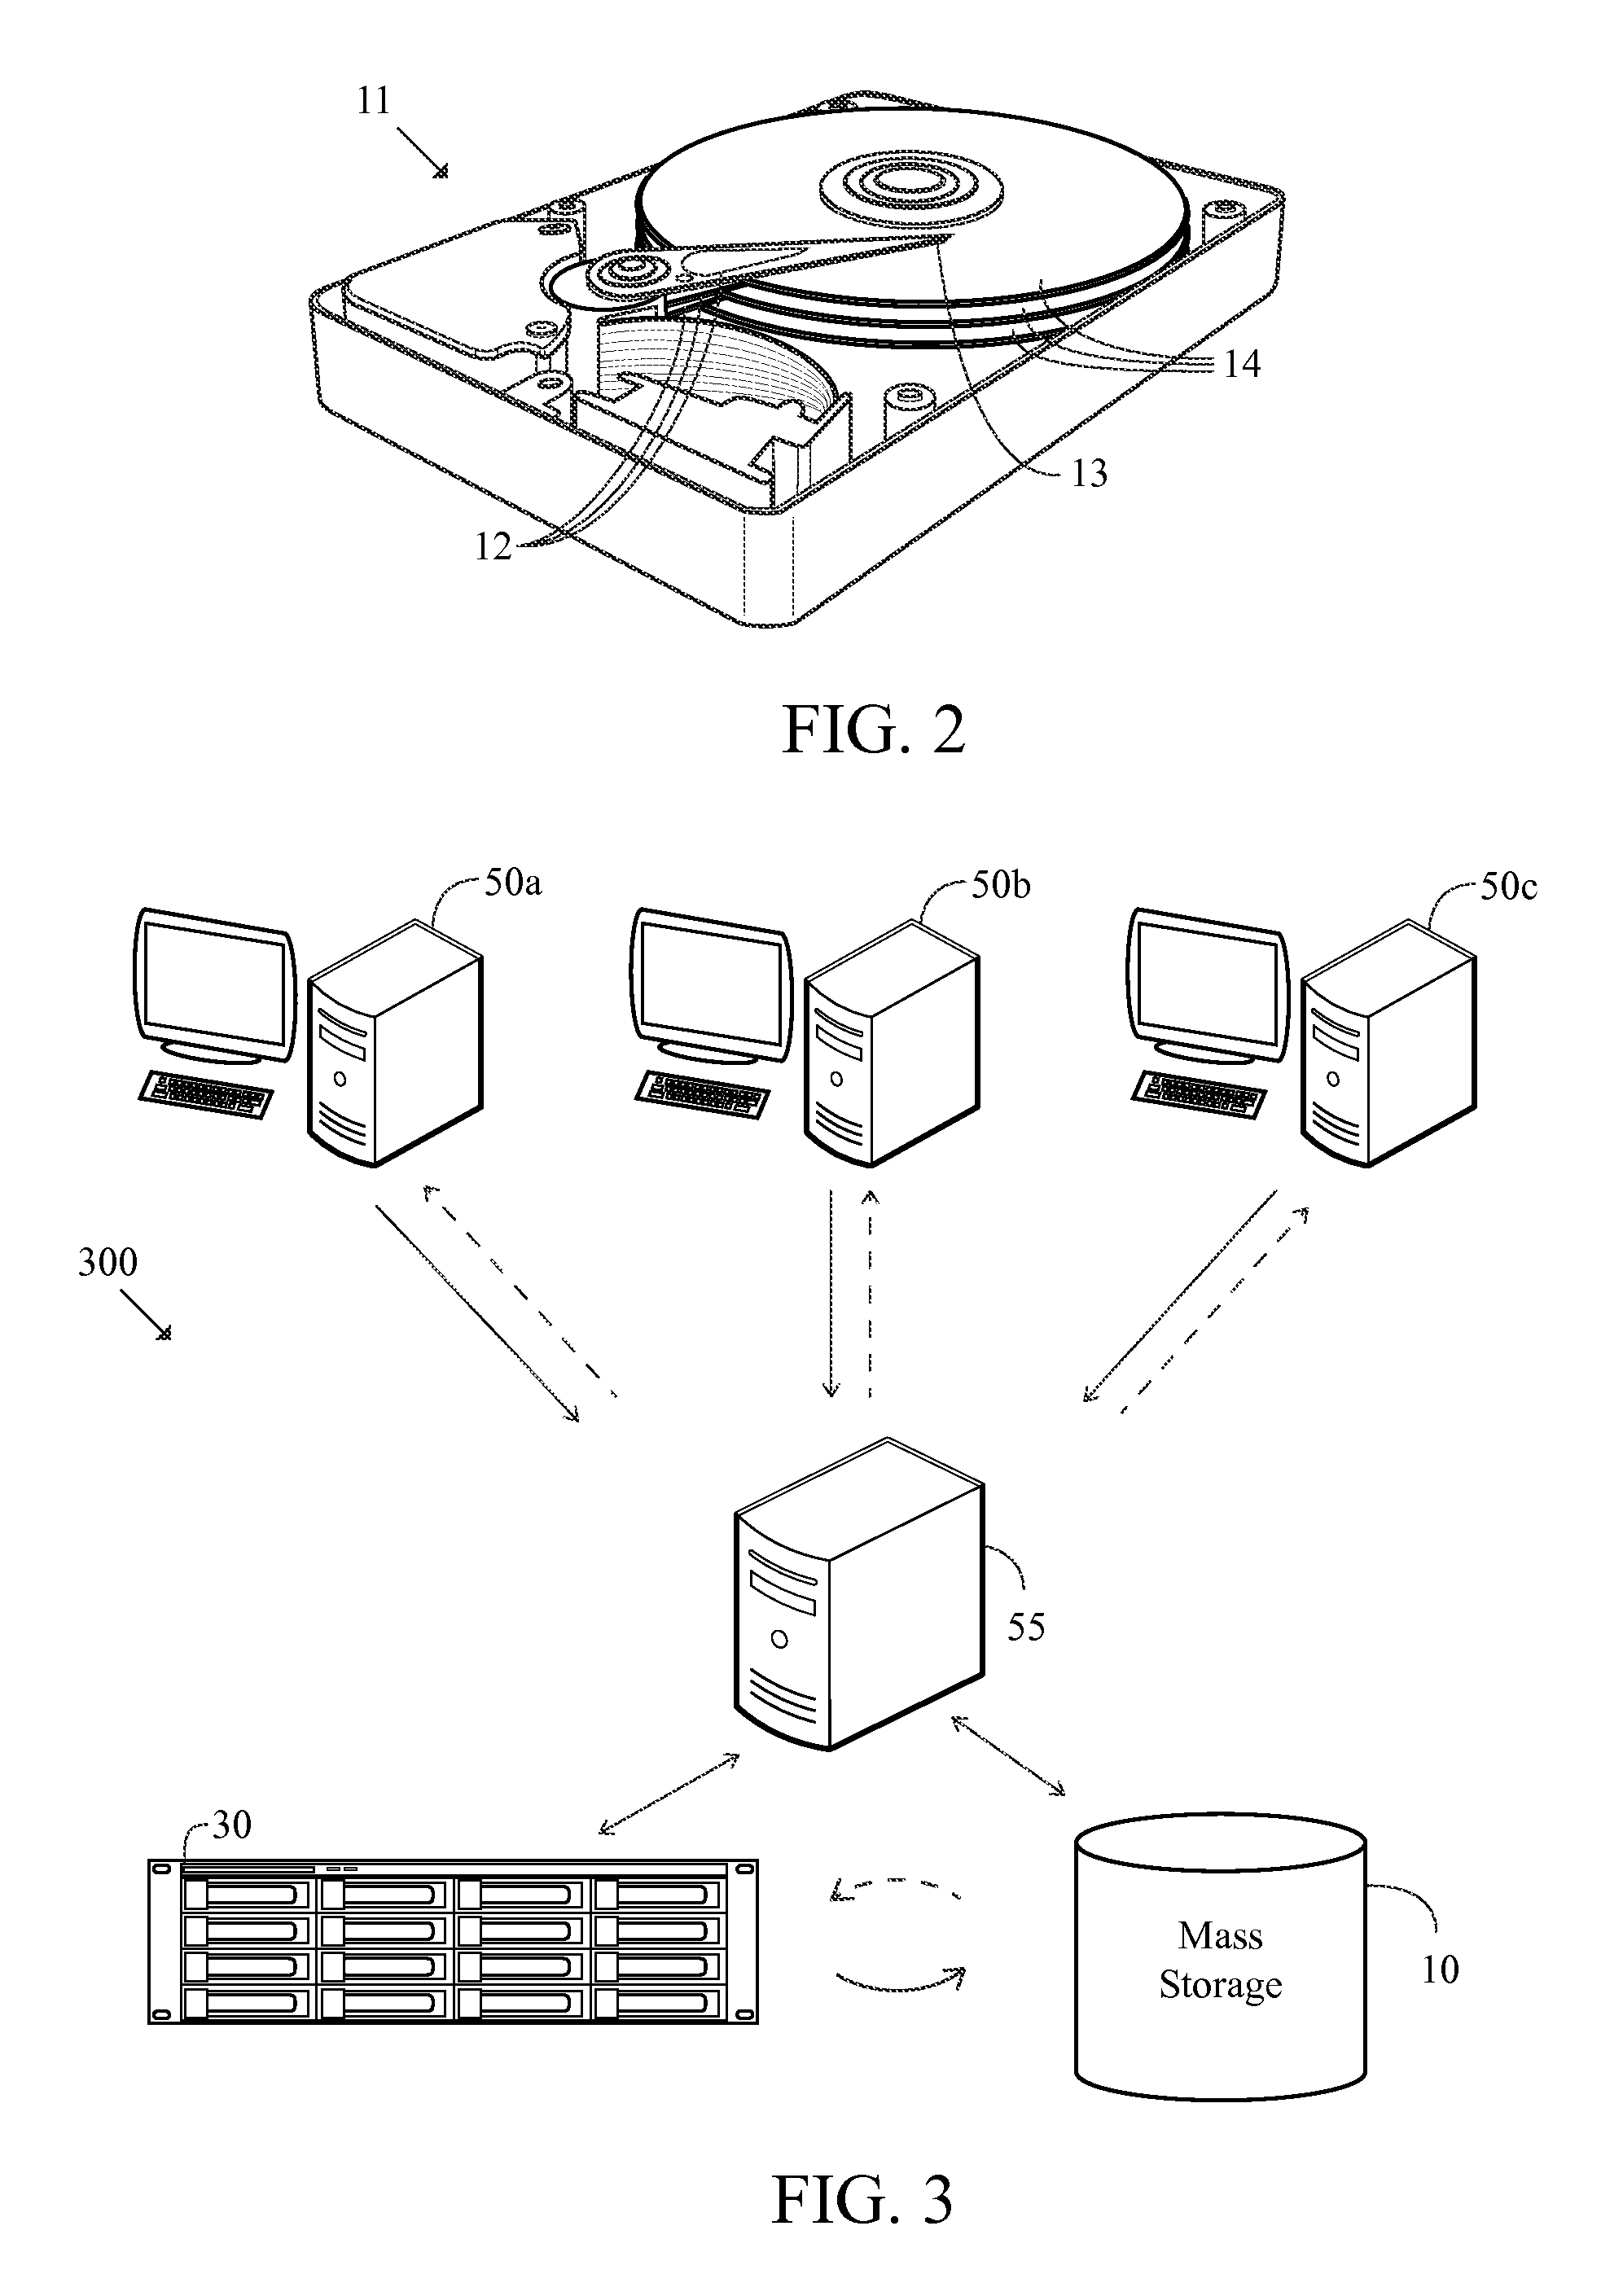 Method for asynchronous population of data caches used with mass storage devices